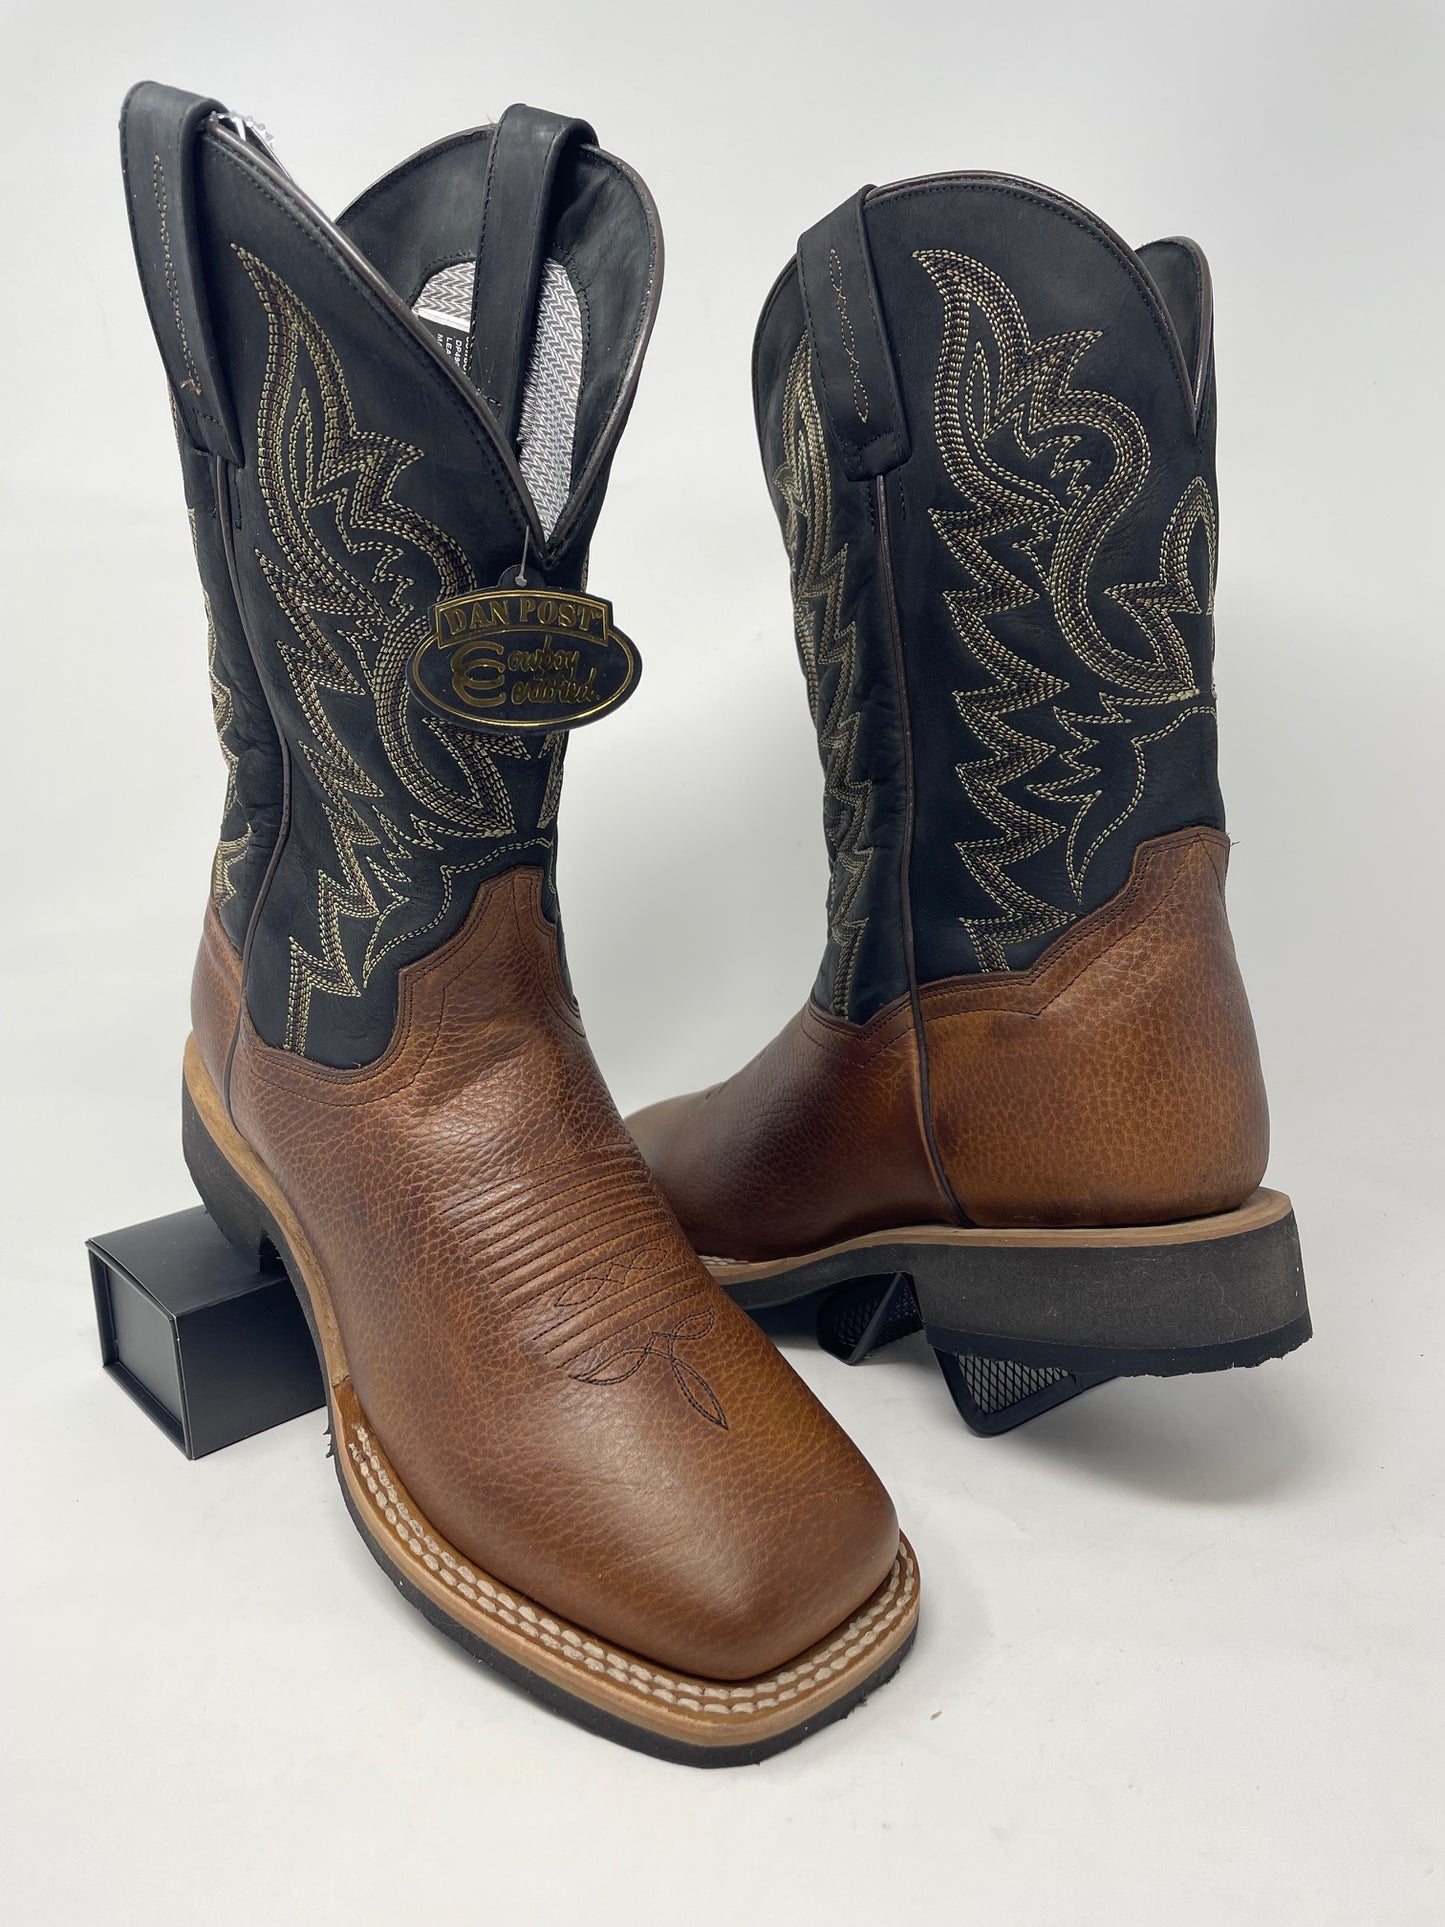 Men's Brown Square Toe Dan Post Boots - Colt Boots and Western Wear